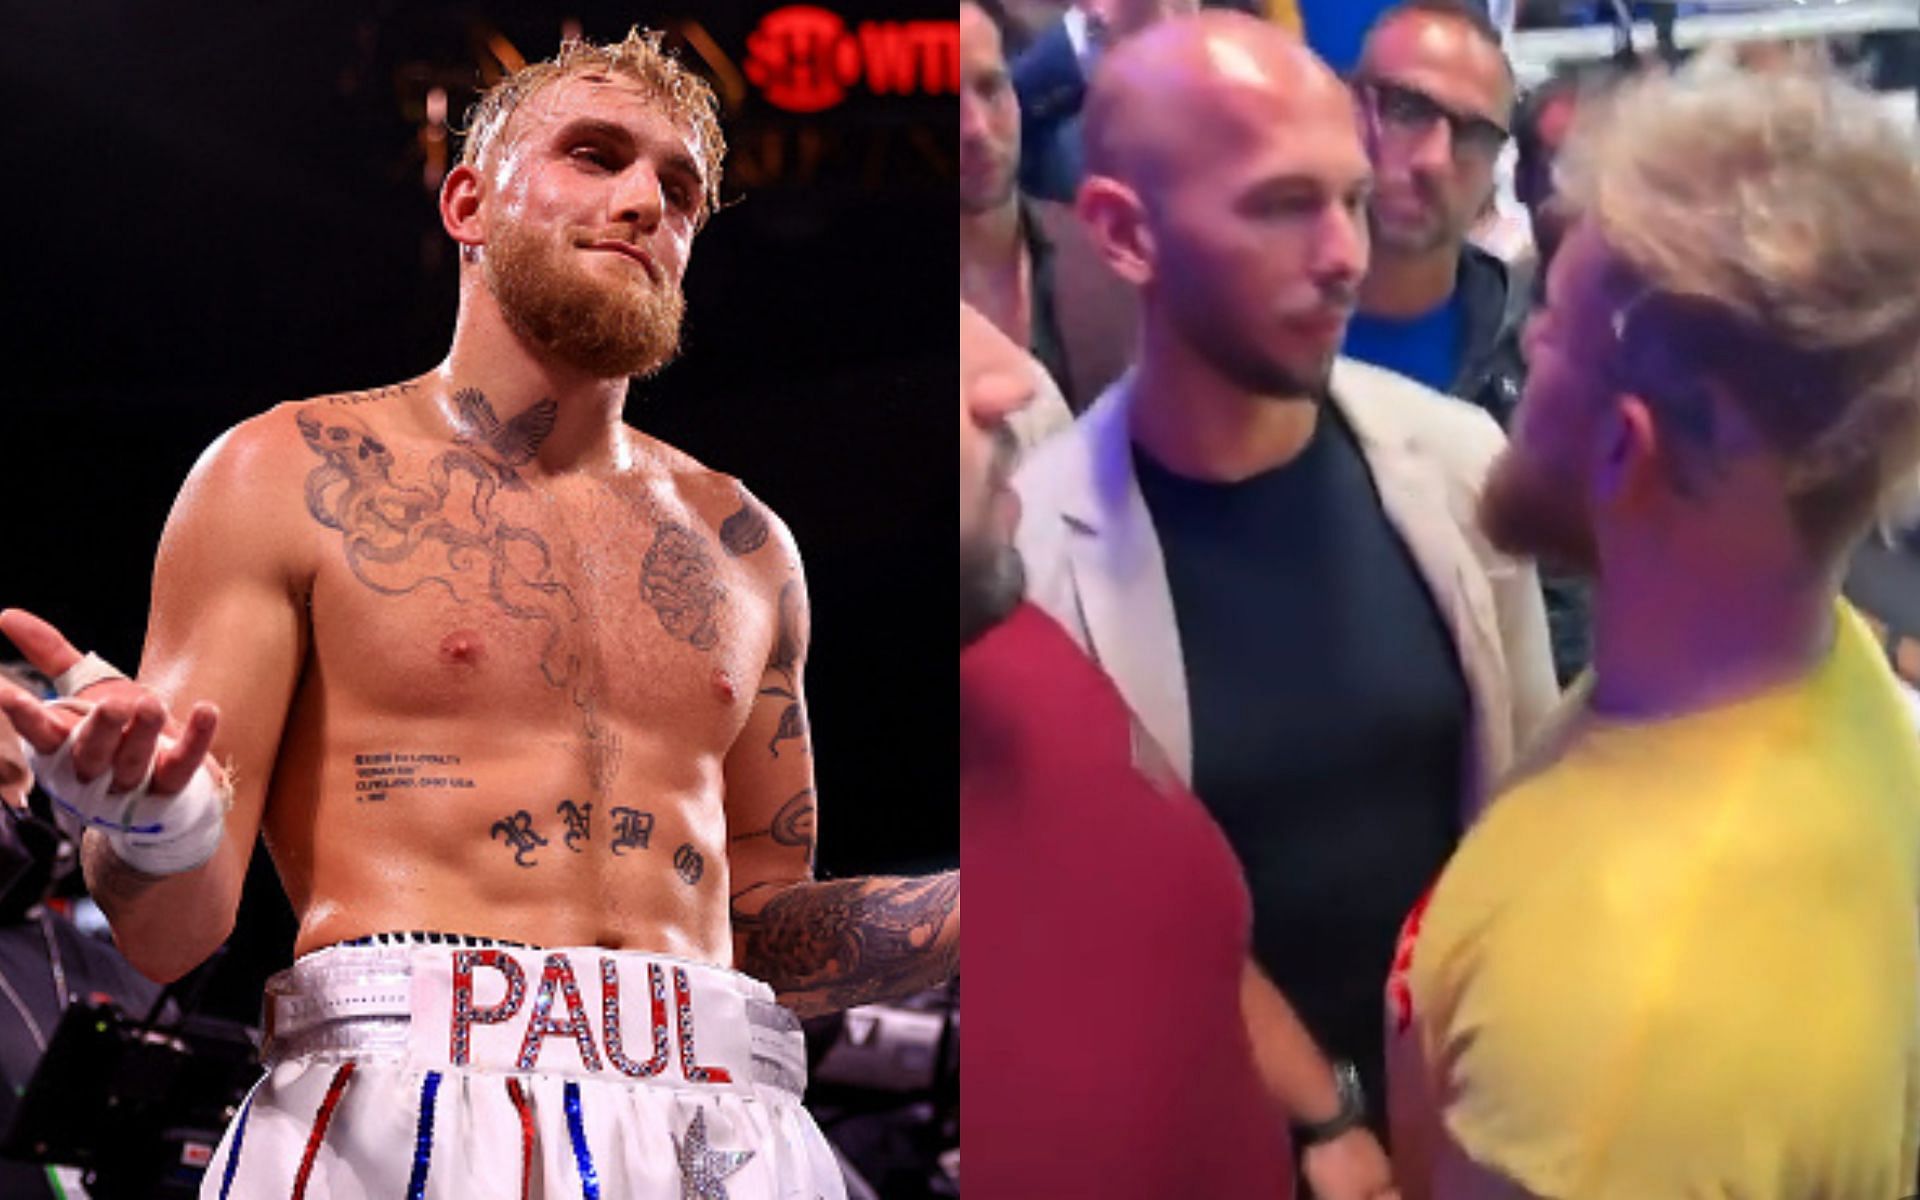 Jake Paul and Andrew Tate face-off ringside at the Floyd Mayweather vs